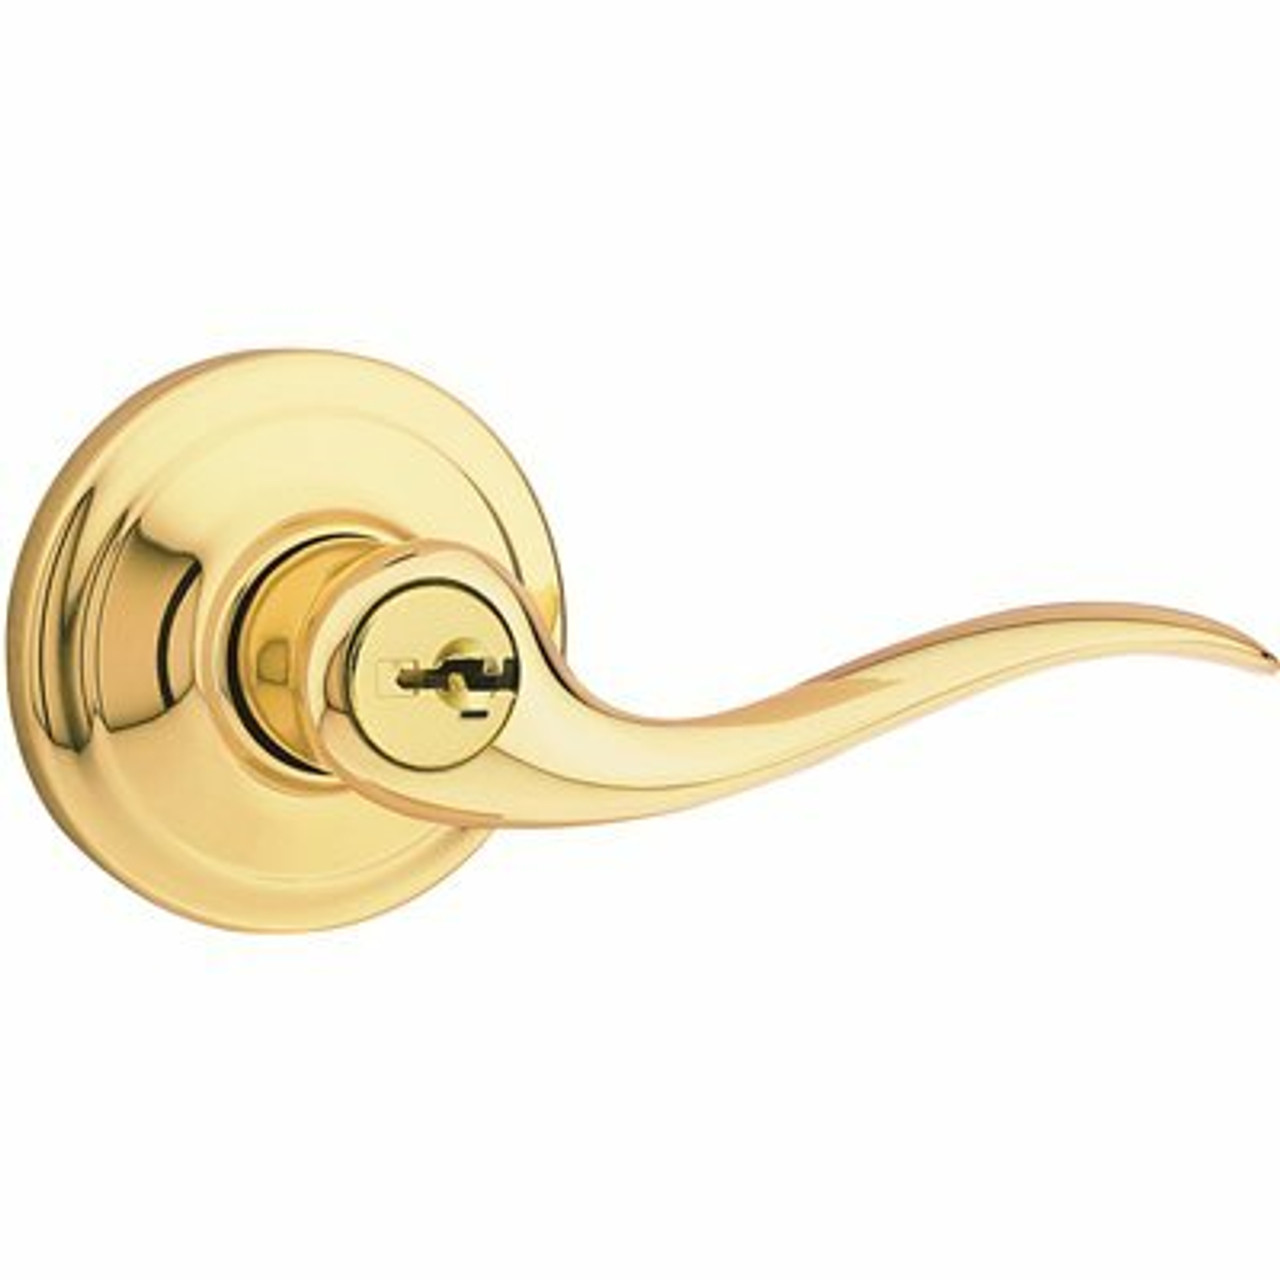 Kwikset Tustin Polished Brass Entry Door Handle Featuring Smartkey Security